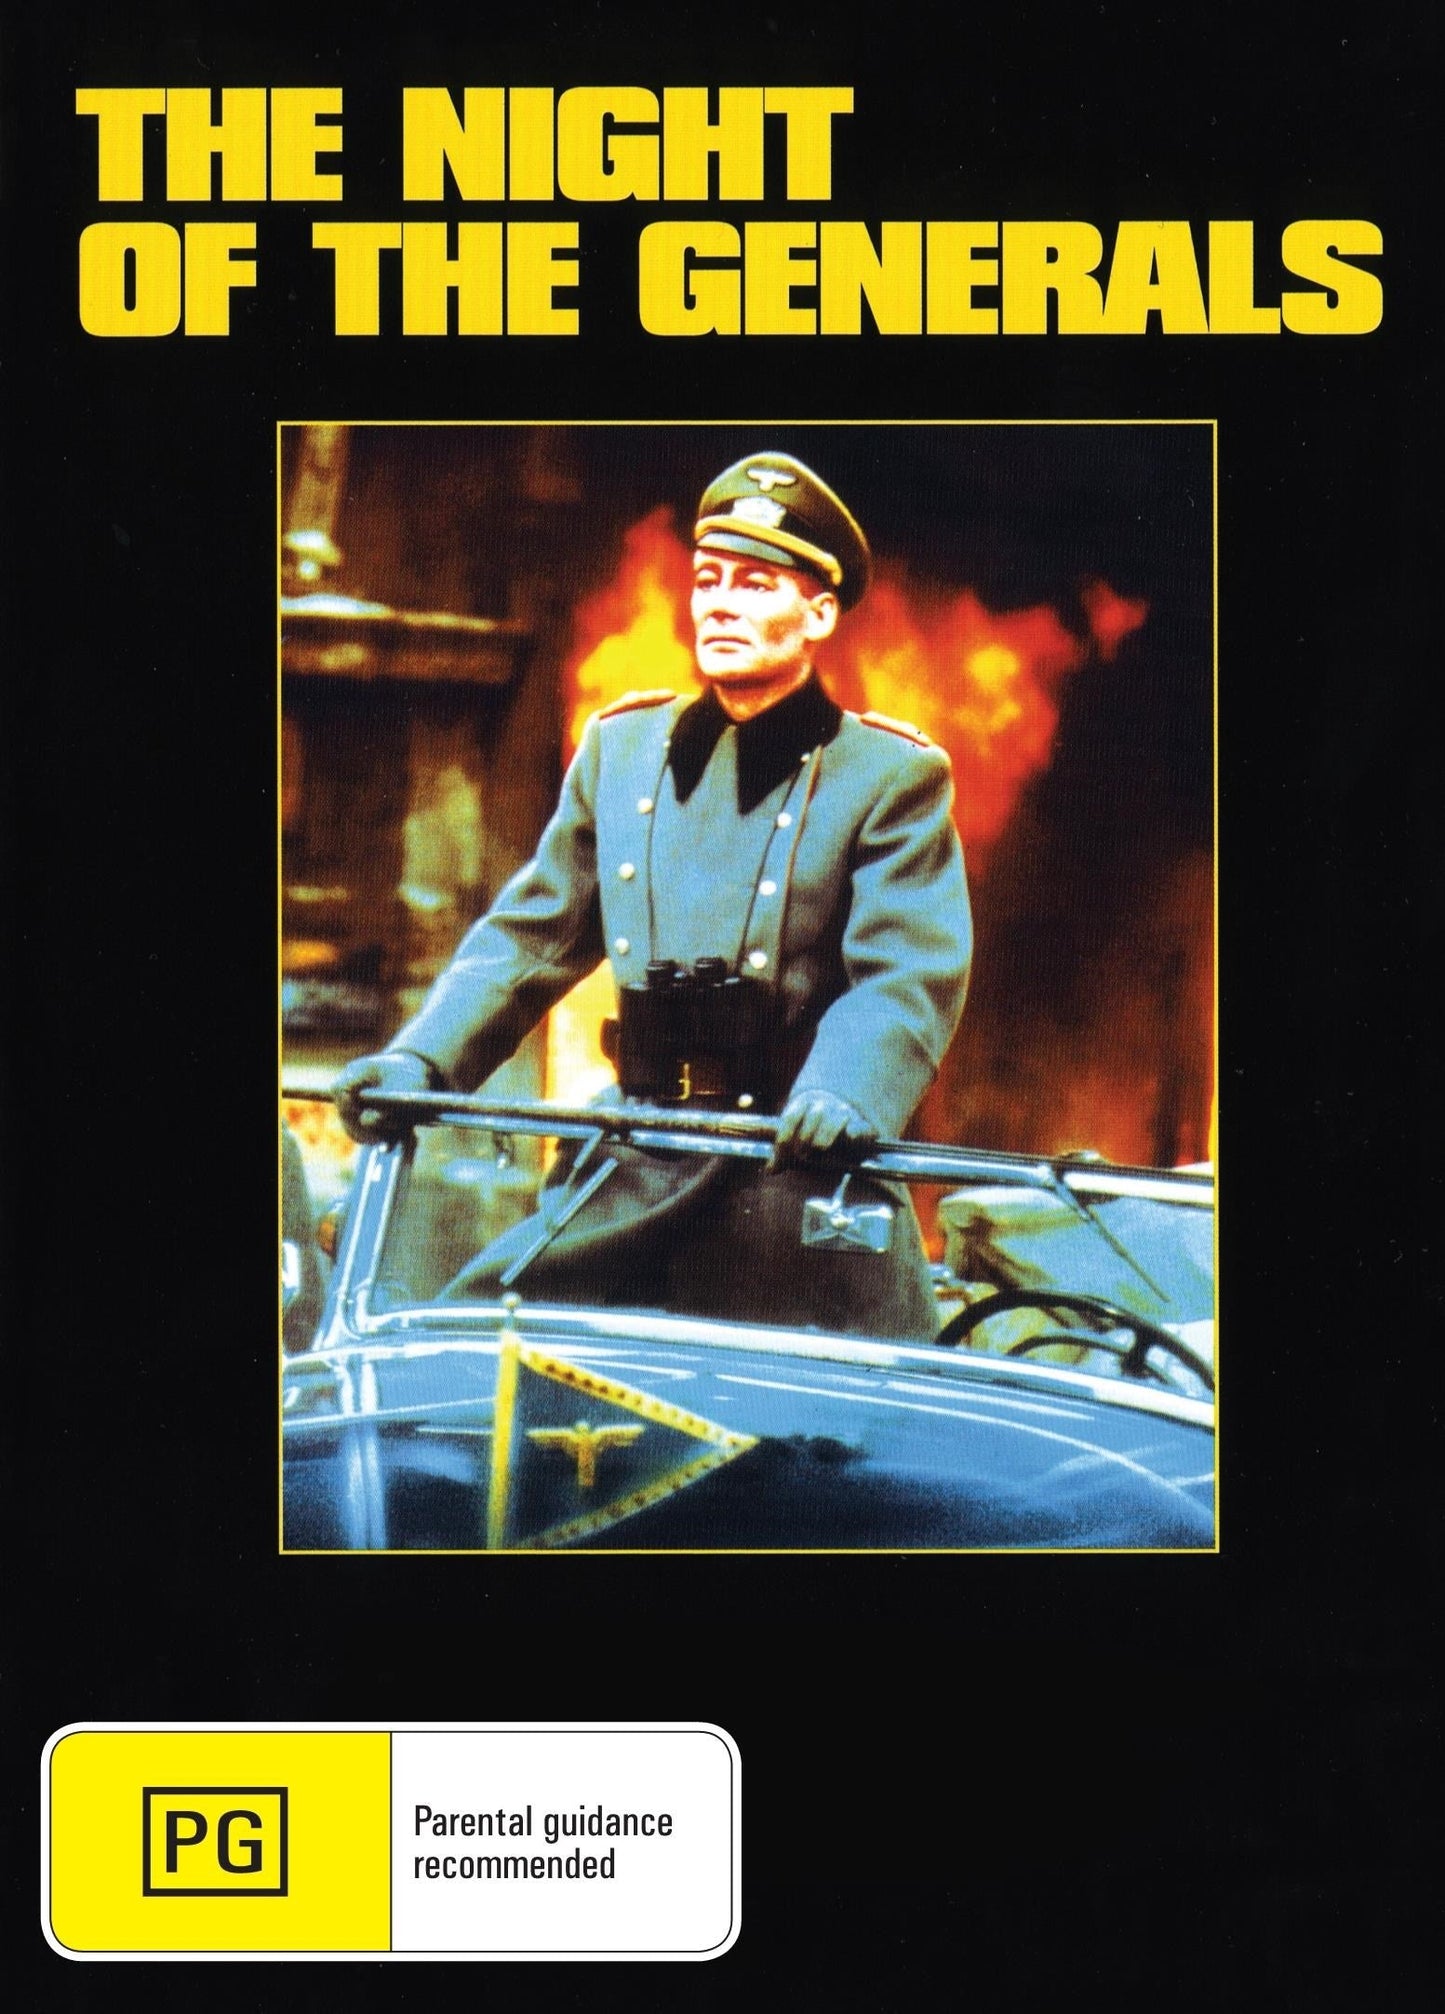 The Night Of The Generals rareandcollectibledvds